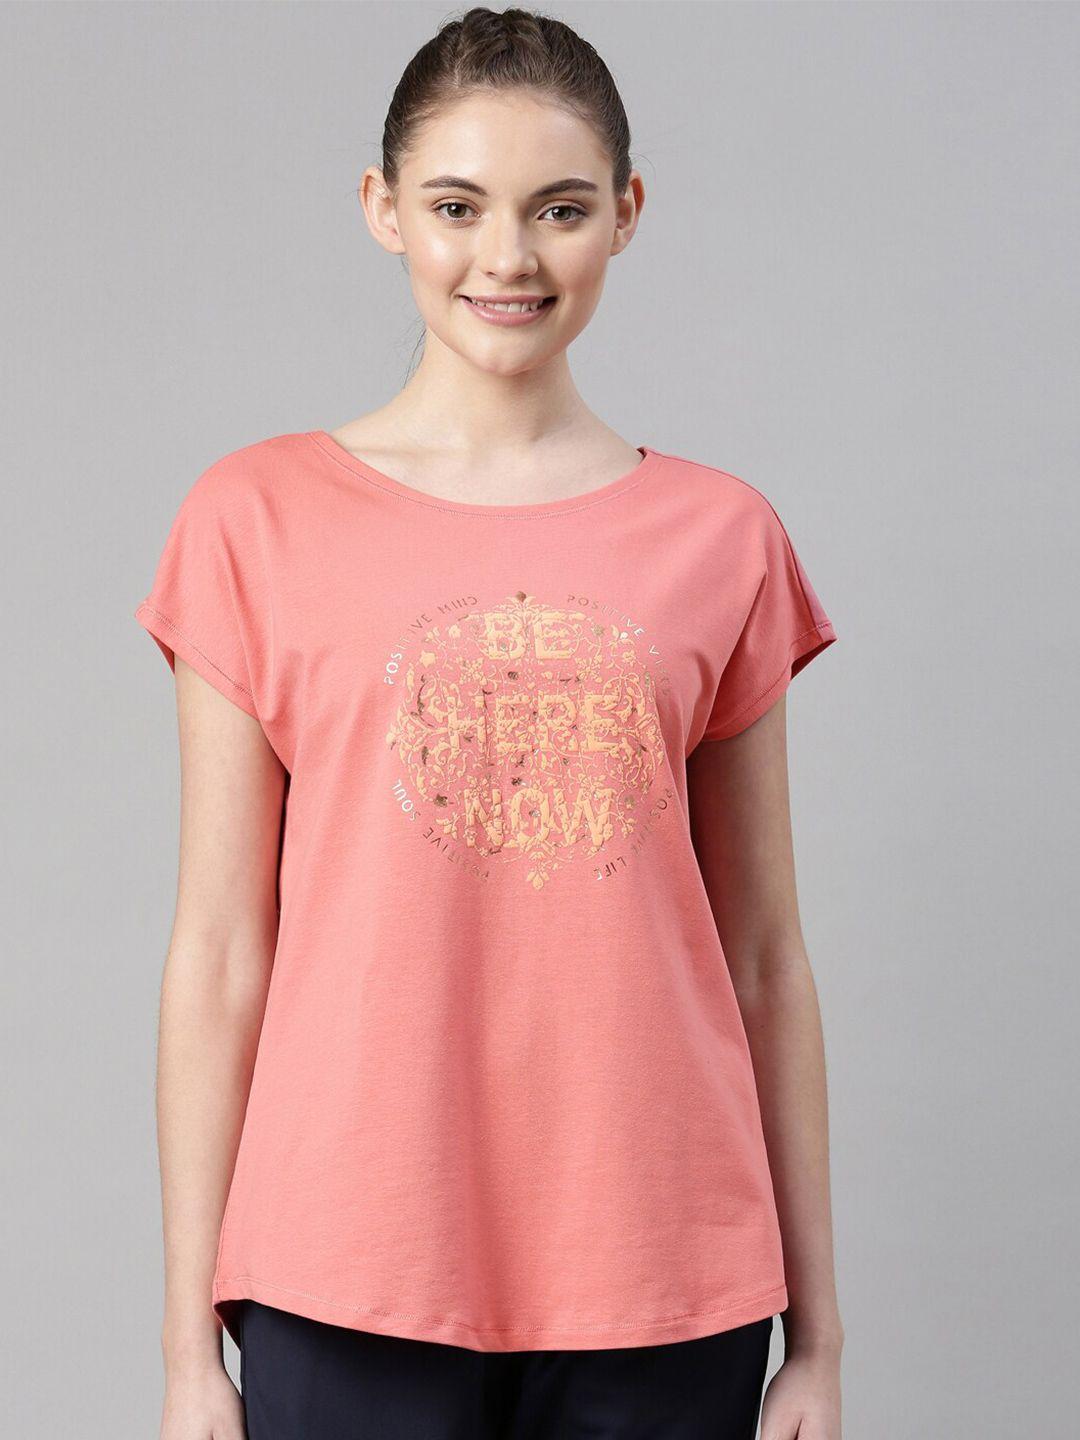 enamor-women-pink-typography-printed-extended-sleeves-antimicrobial-t-shirt